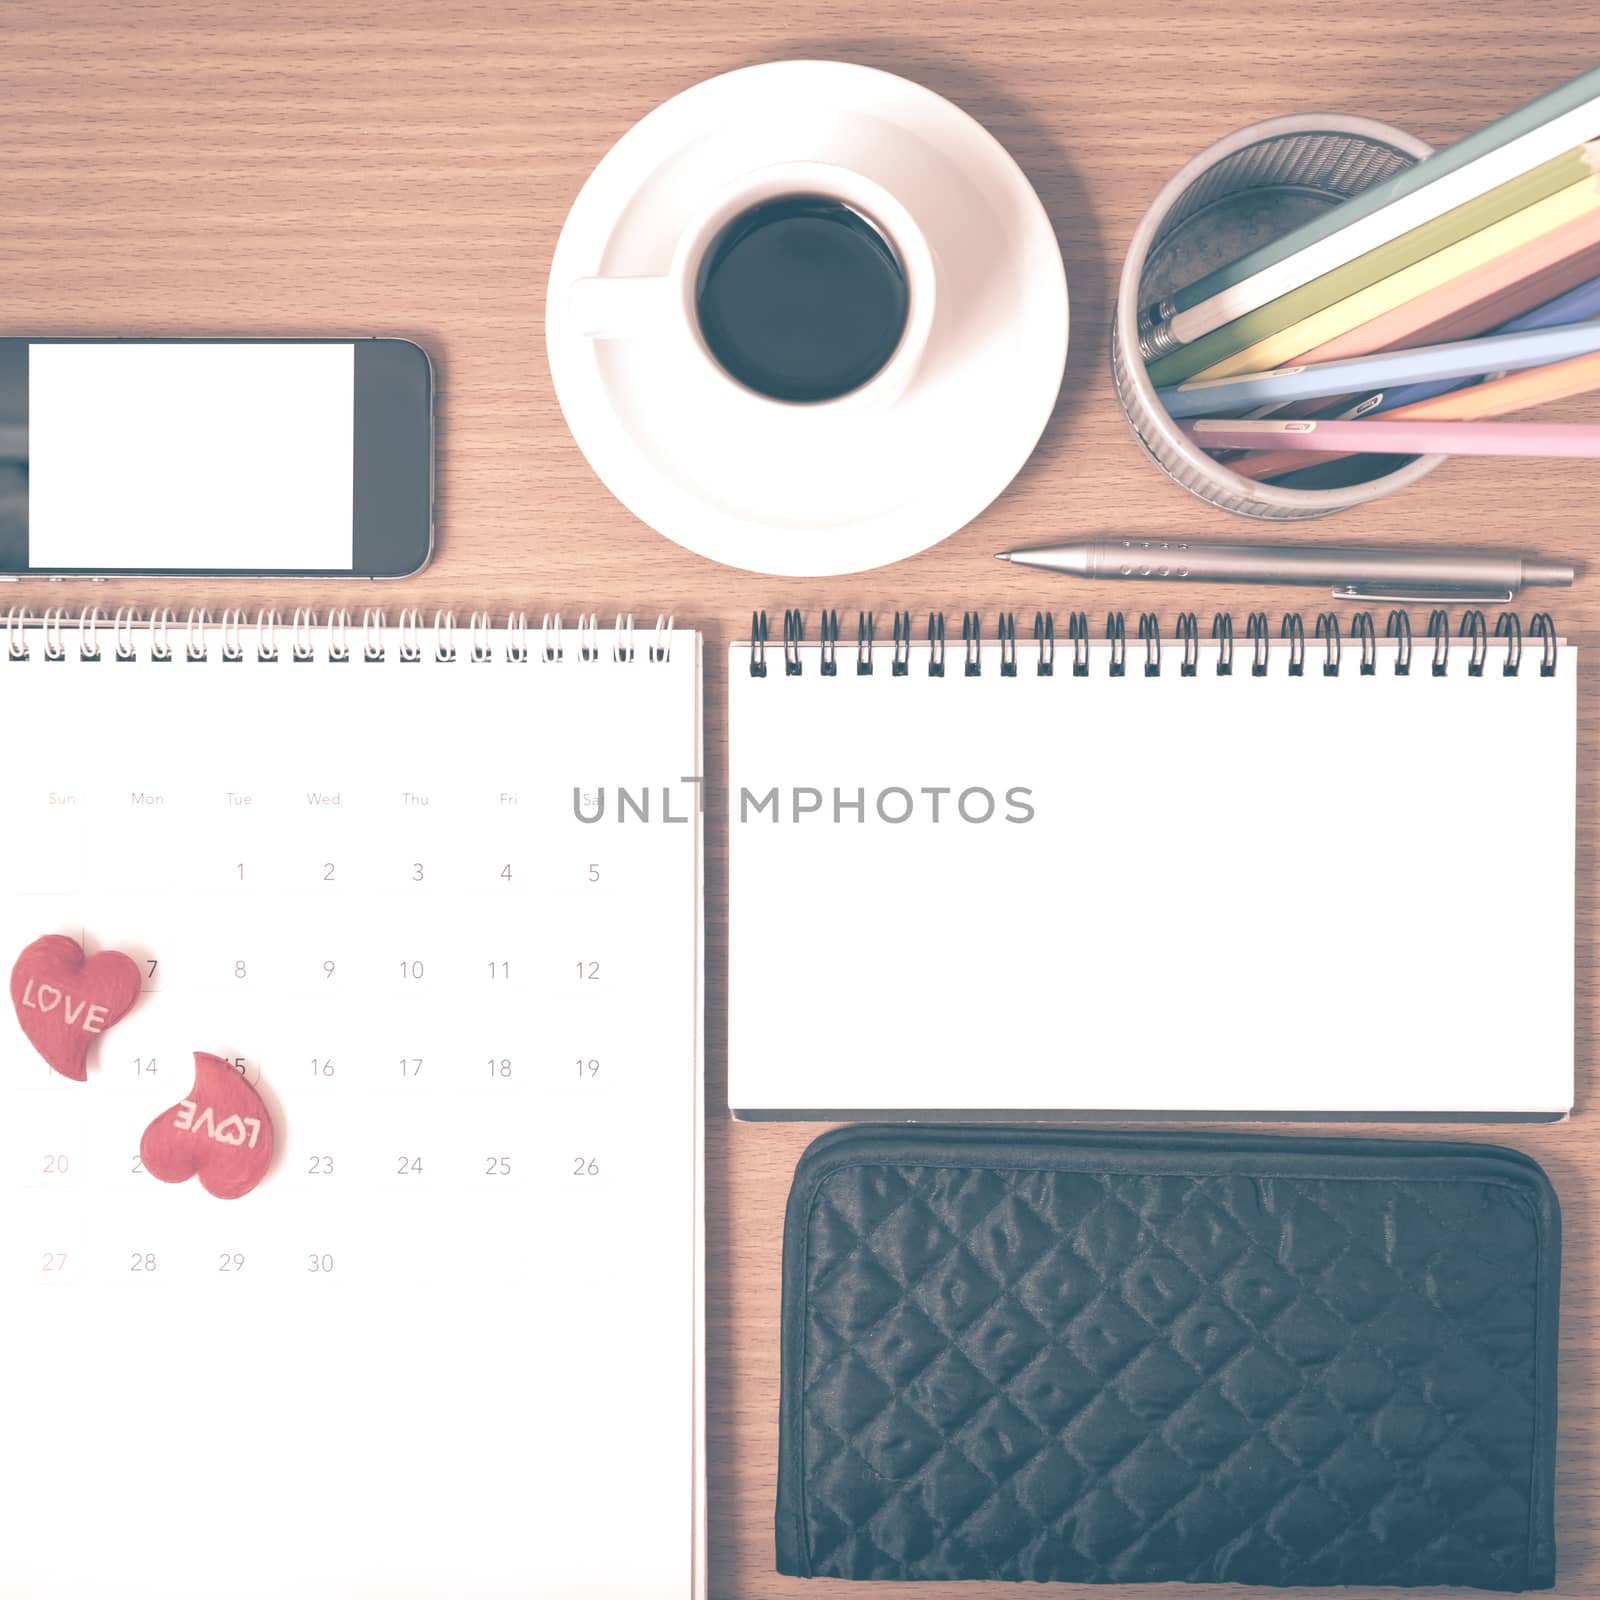 office desk : coffee with phone,wallet,calendar,heart,color pencil box,notepad on wood background vintage style